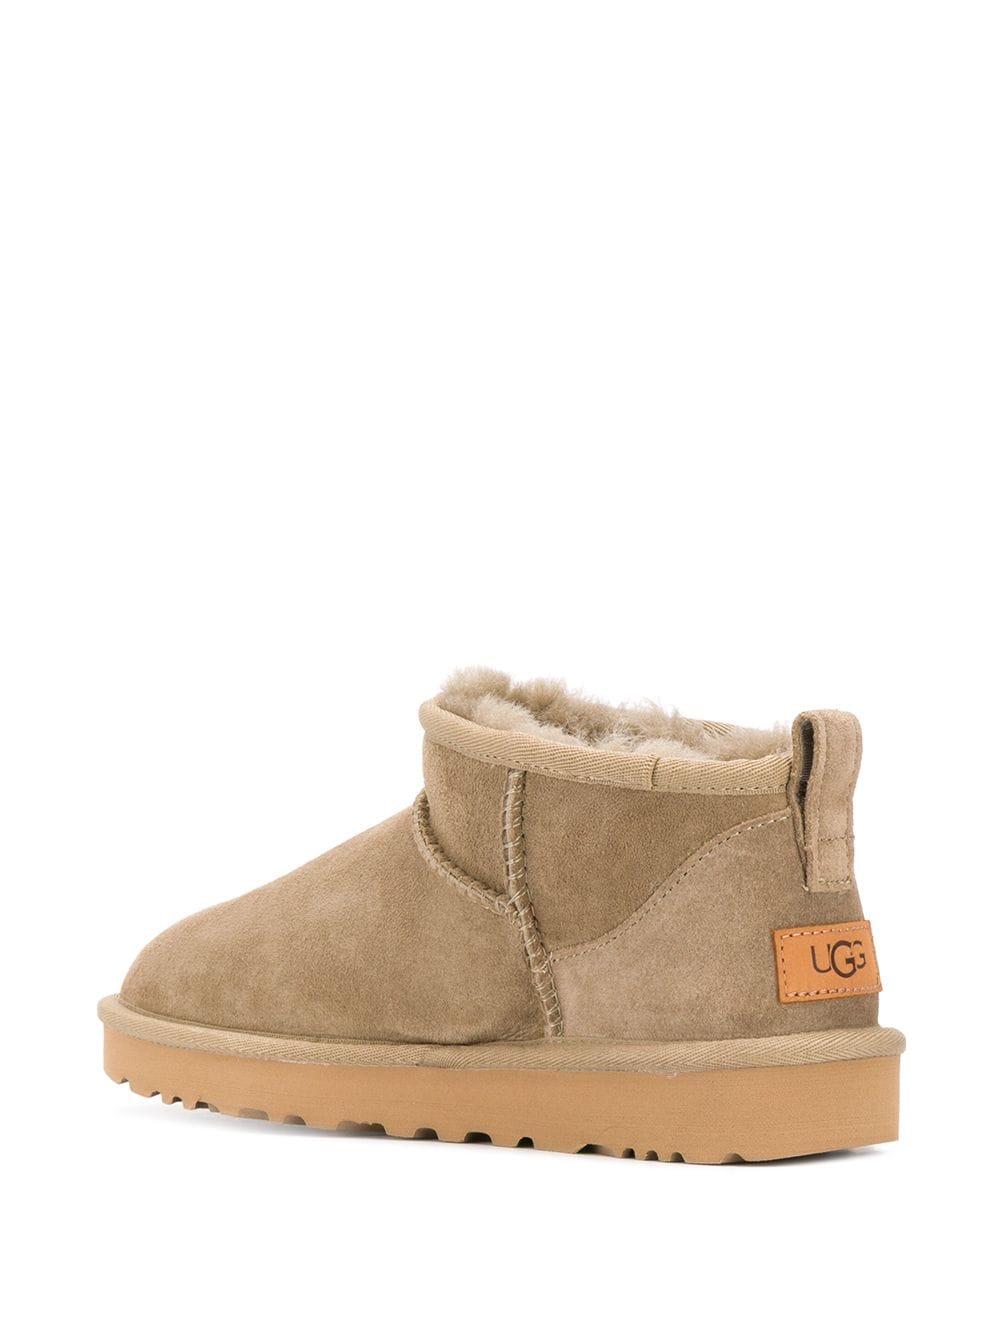 UGG Leather Classic Ultra Mini Boot Antilope in Beige (Natural) - Lyst